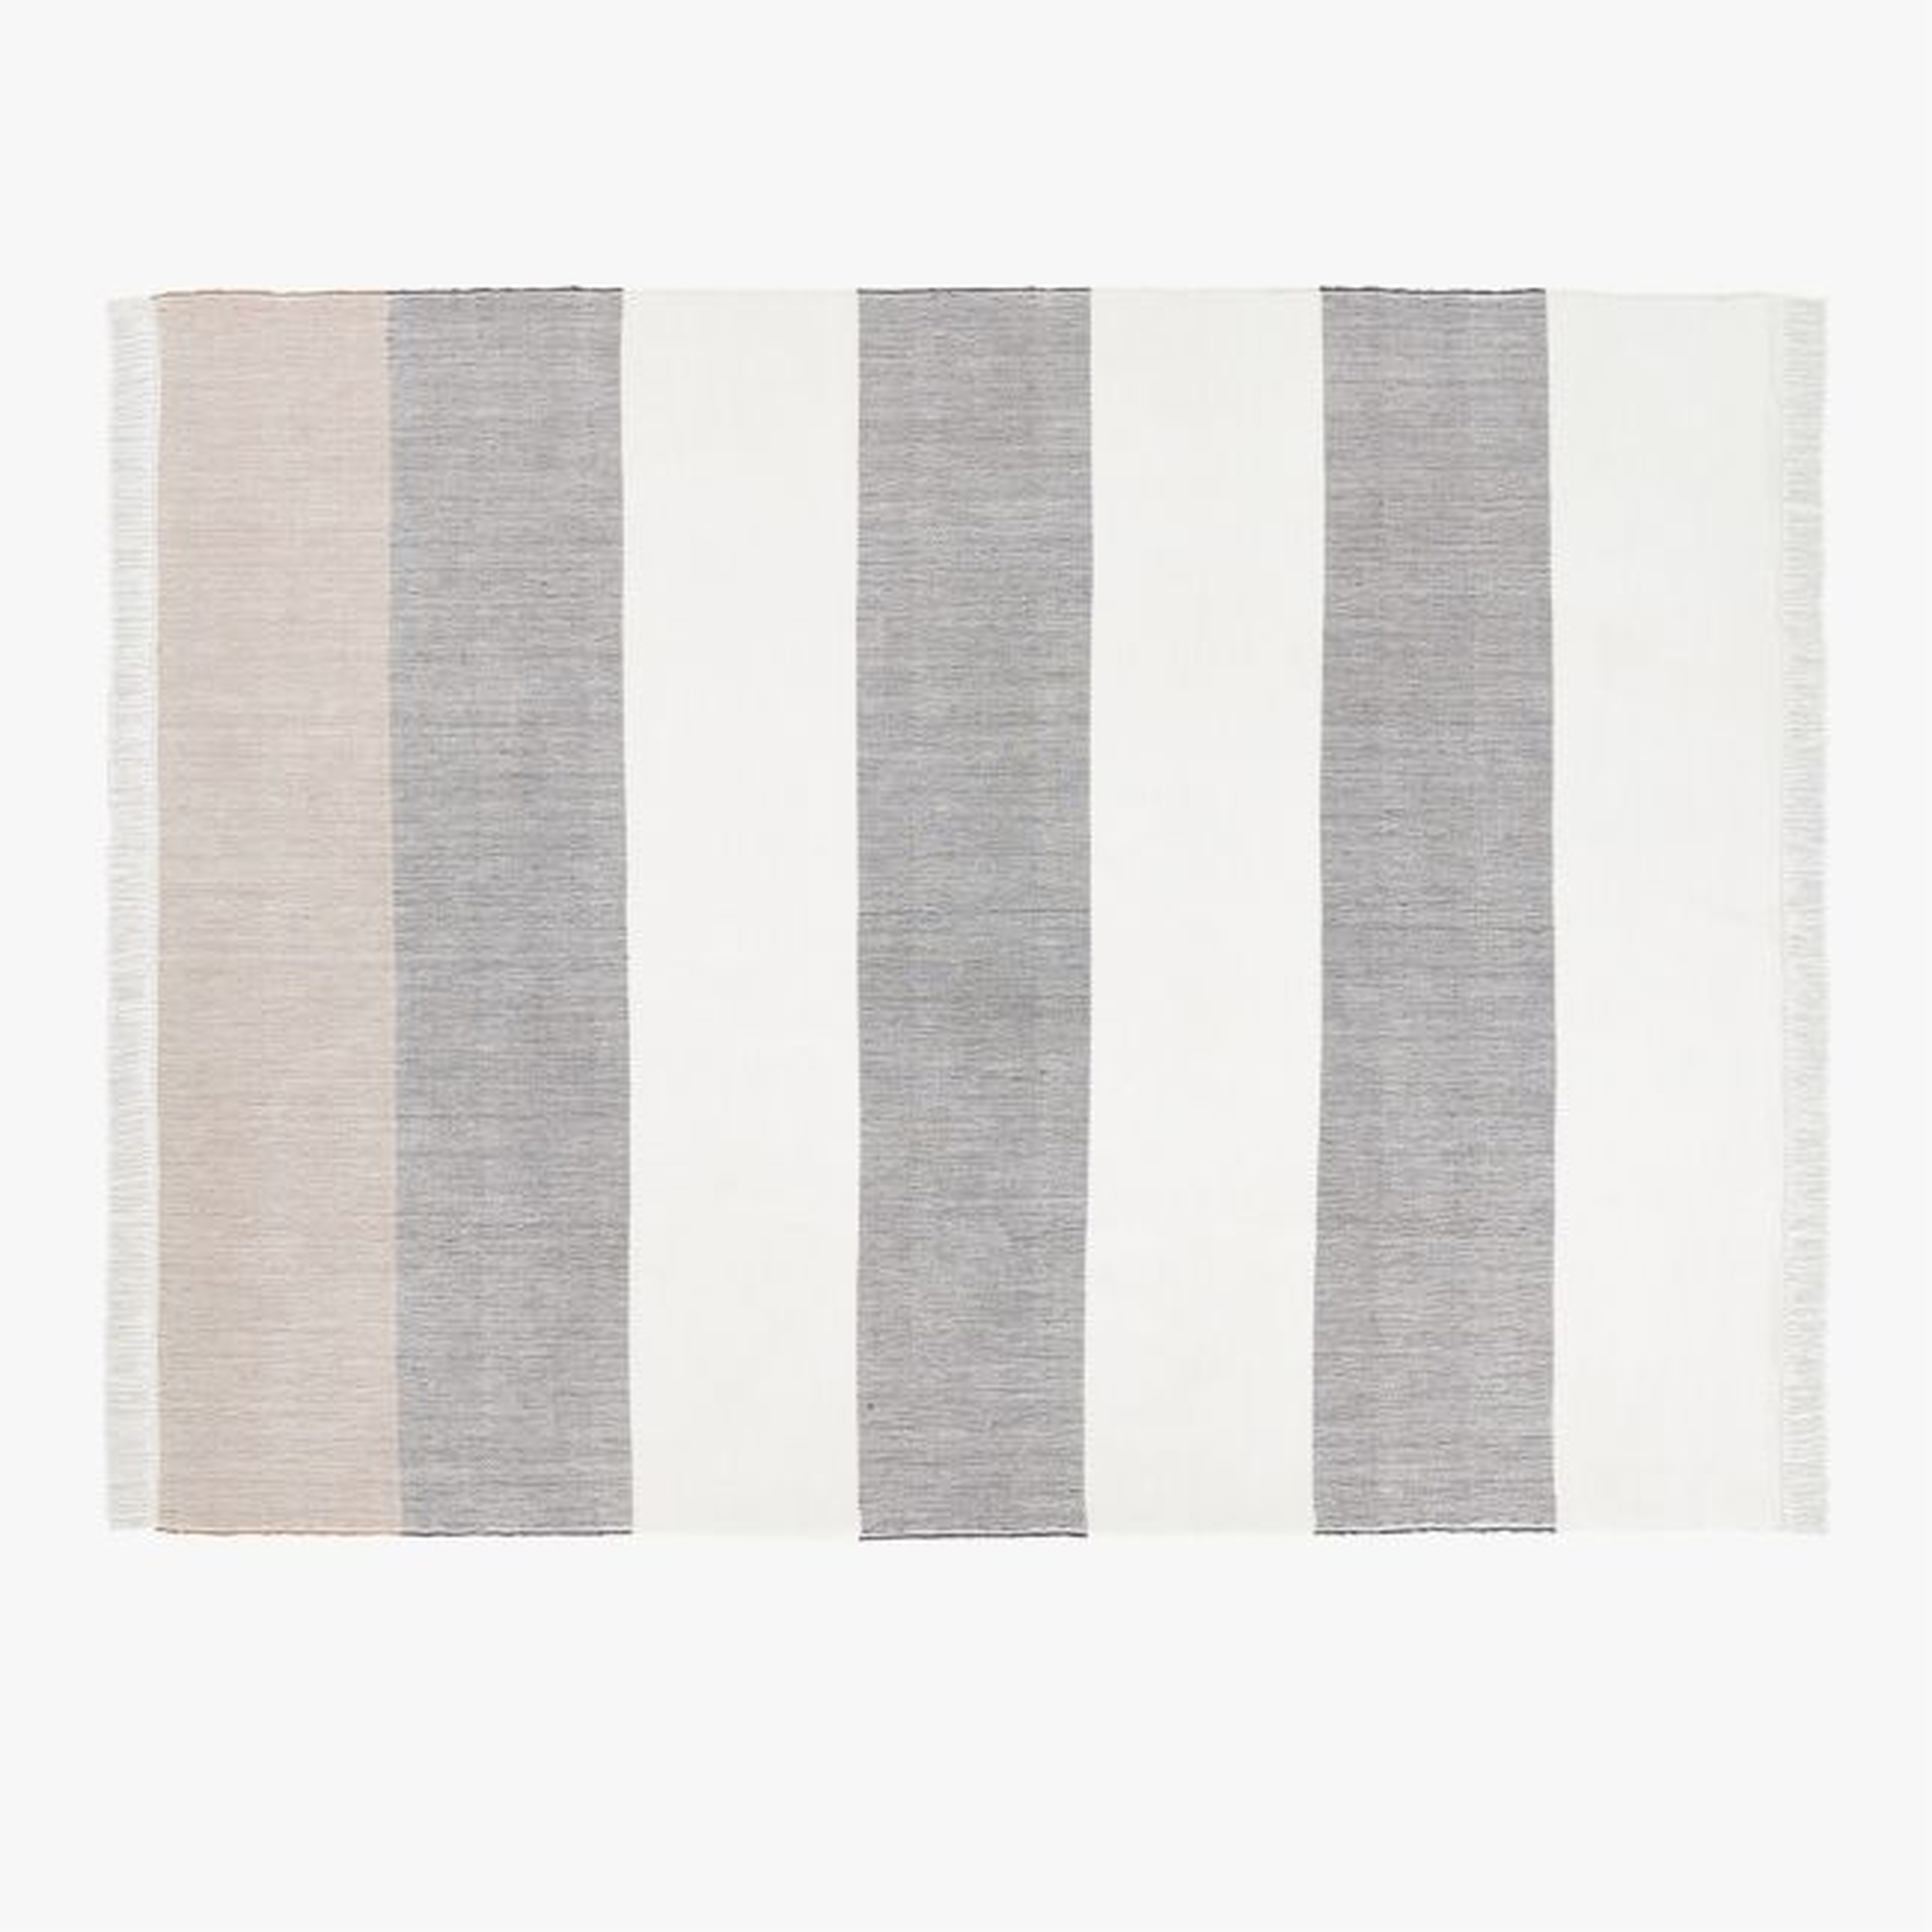 Kelso Charcoal and Camel Stripe Indoor/Outdoor Area Rug 9'x12' - CB2